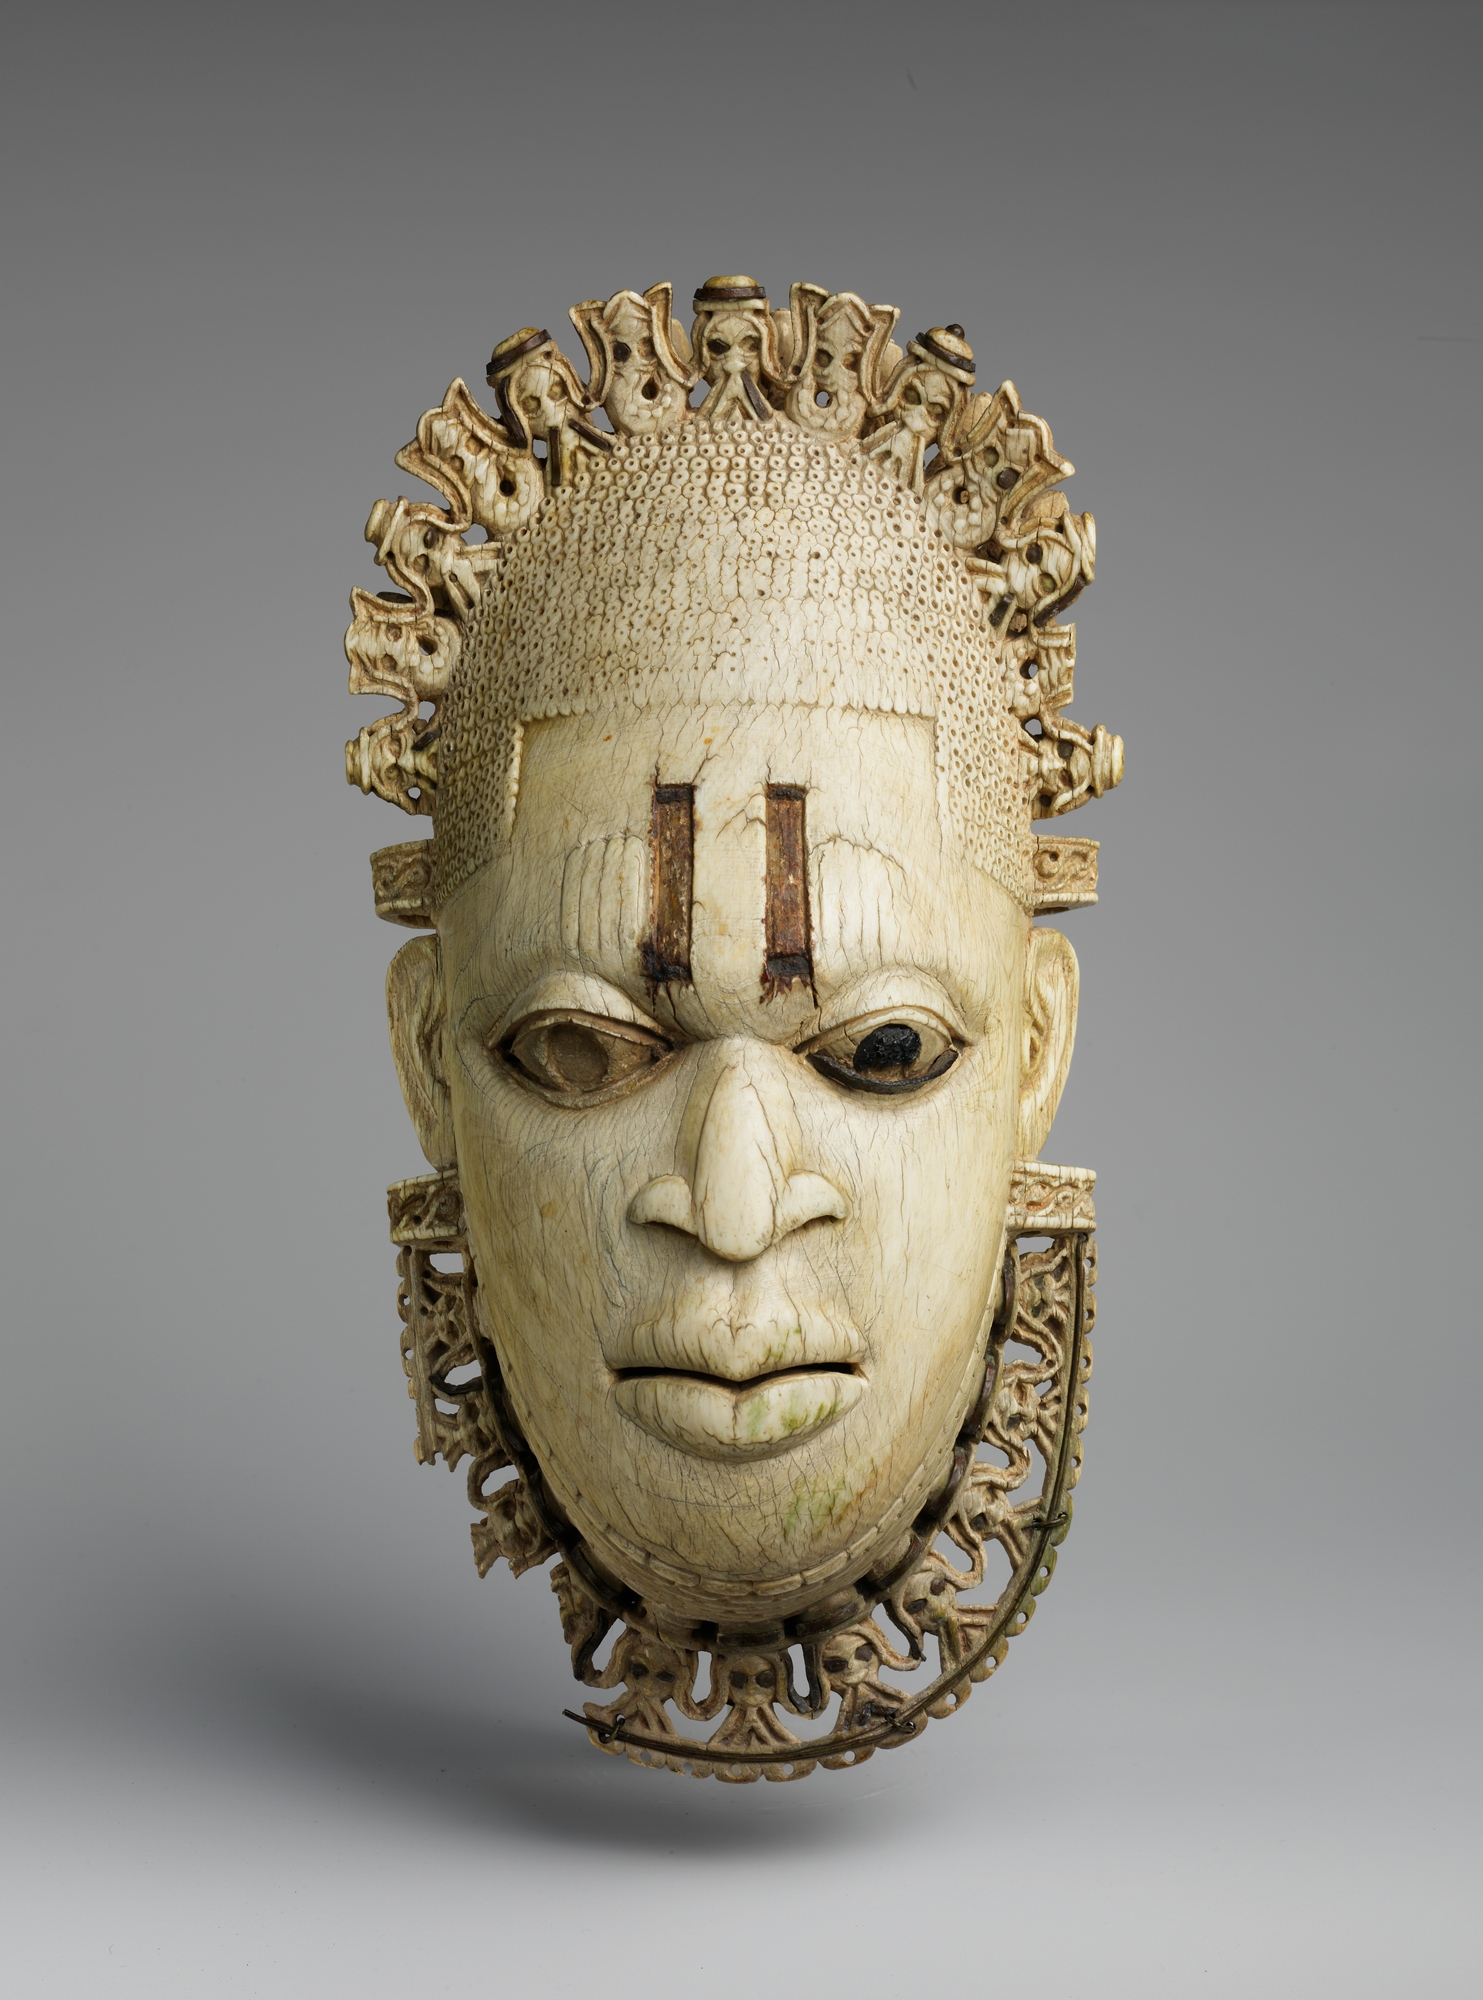 Queen Mother Pendant Mask: Iyoba by Unknown Artist - 16th century - 23.8 x 12.7 x 6.4 cm Metropolitan Museum of Art